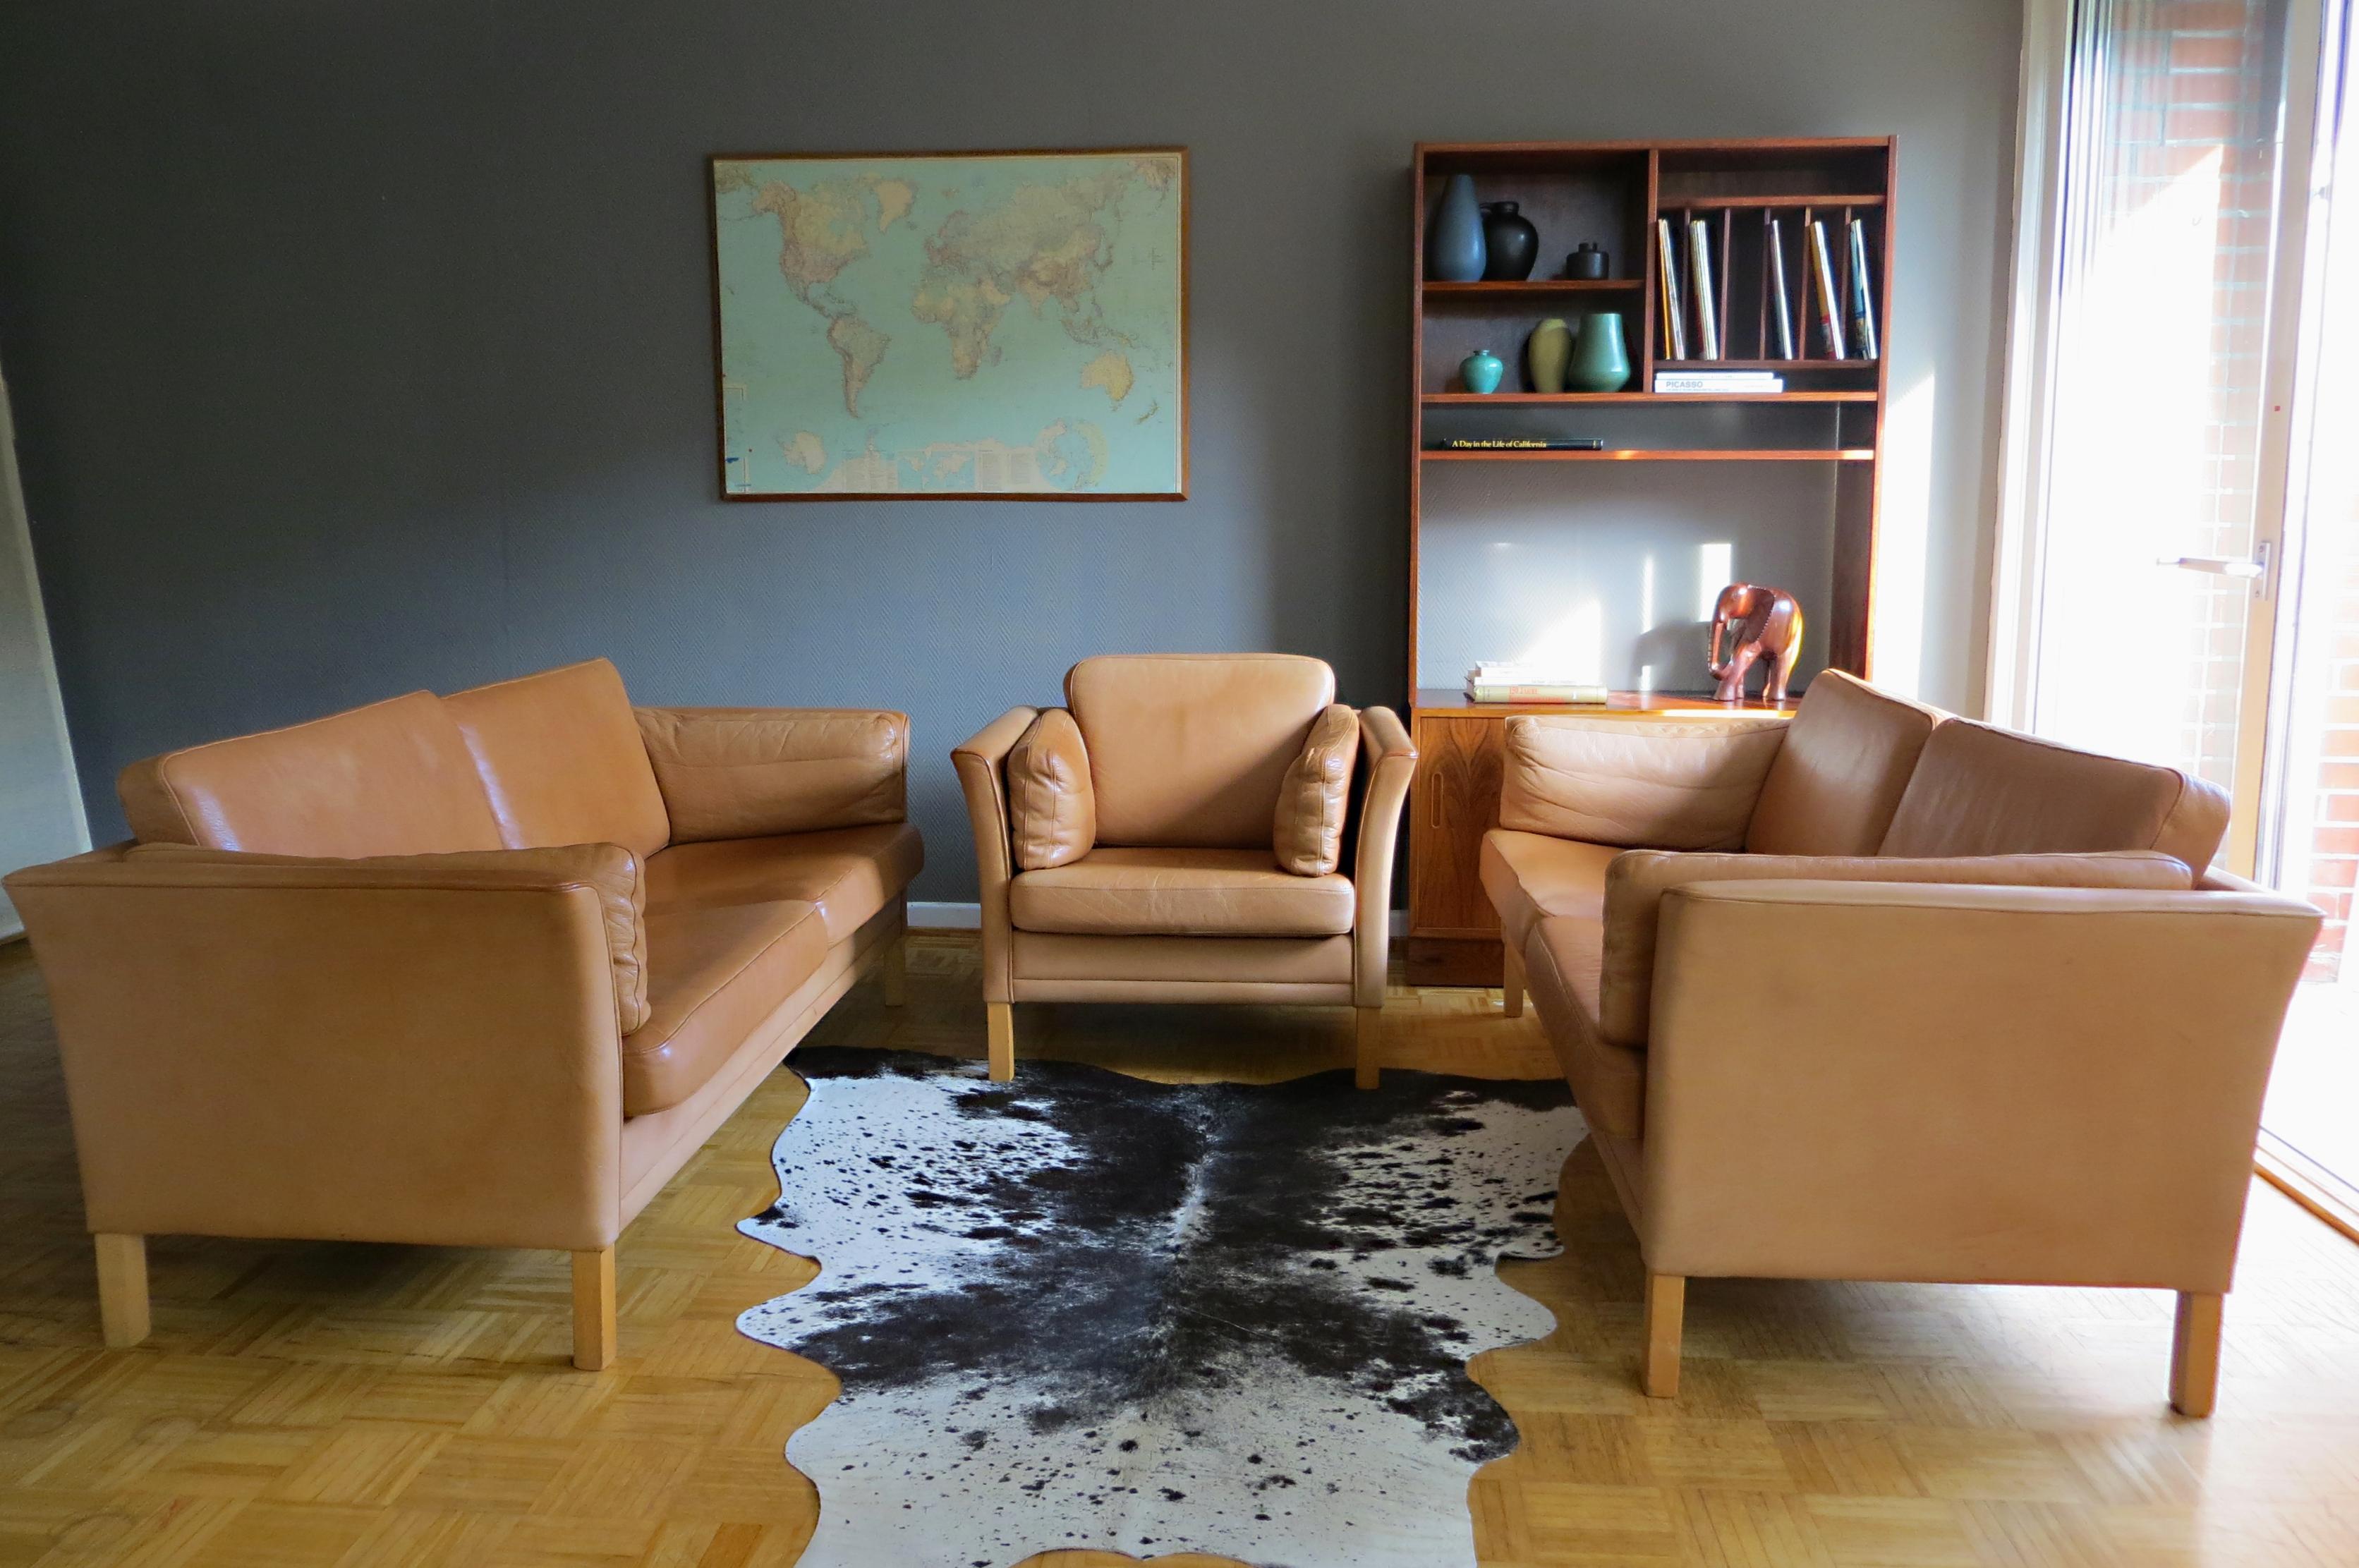 A very comfortable living room leather sofa set by Mogens Hansen Denmark
from the late 1960s-early 1970s is being offered here. This offer includes 2x three-seat leather sofas and one easy chair.
The living room suite is reminiscent of the designs